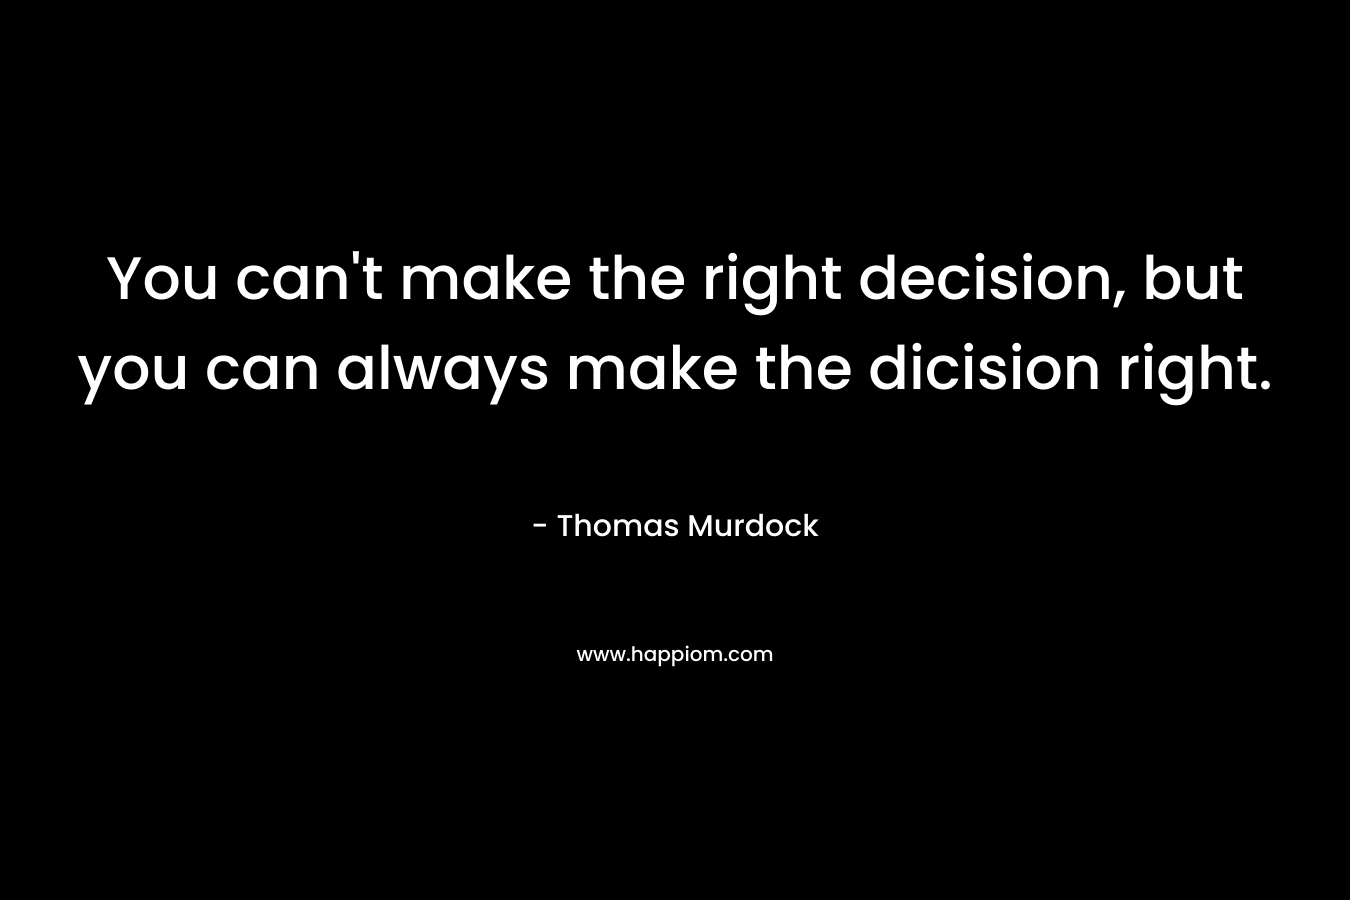 You can’t make the right decision, but you can always make the dicision right. – Thomas Murdock